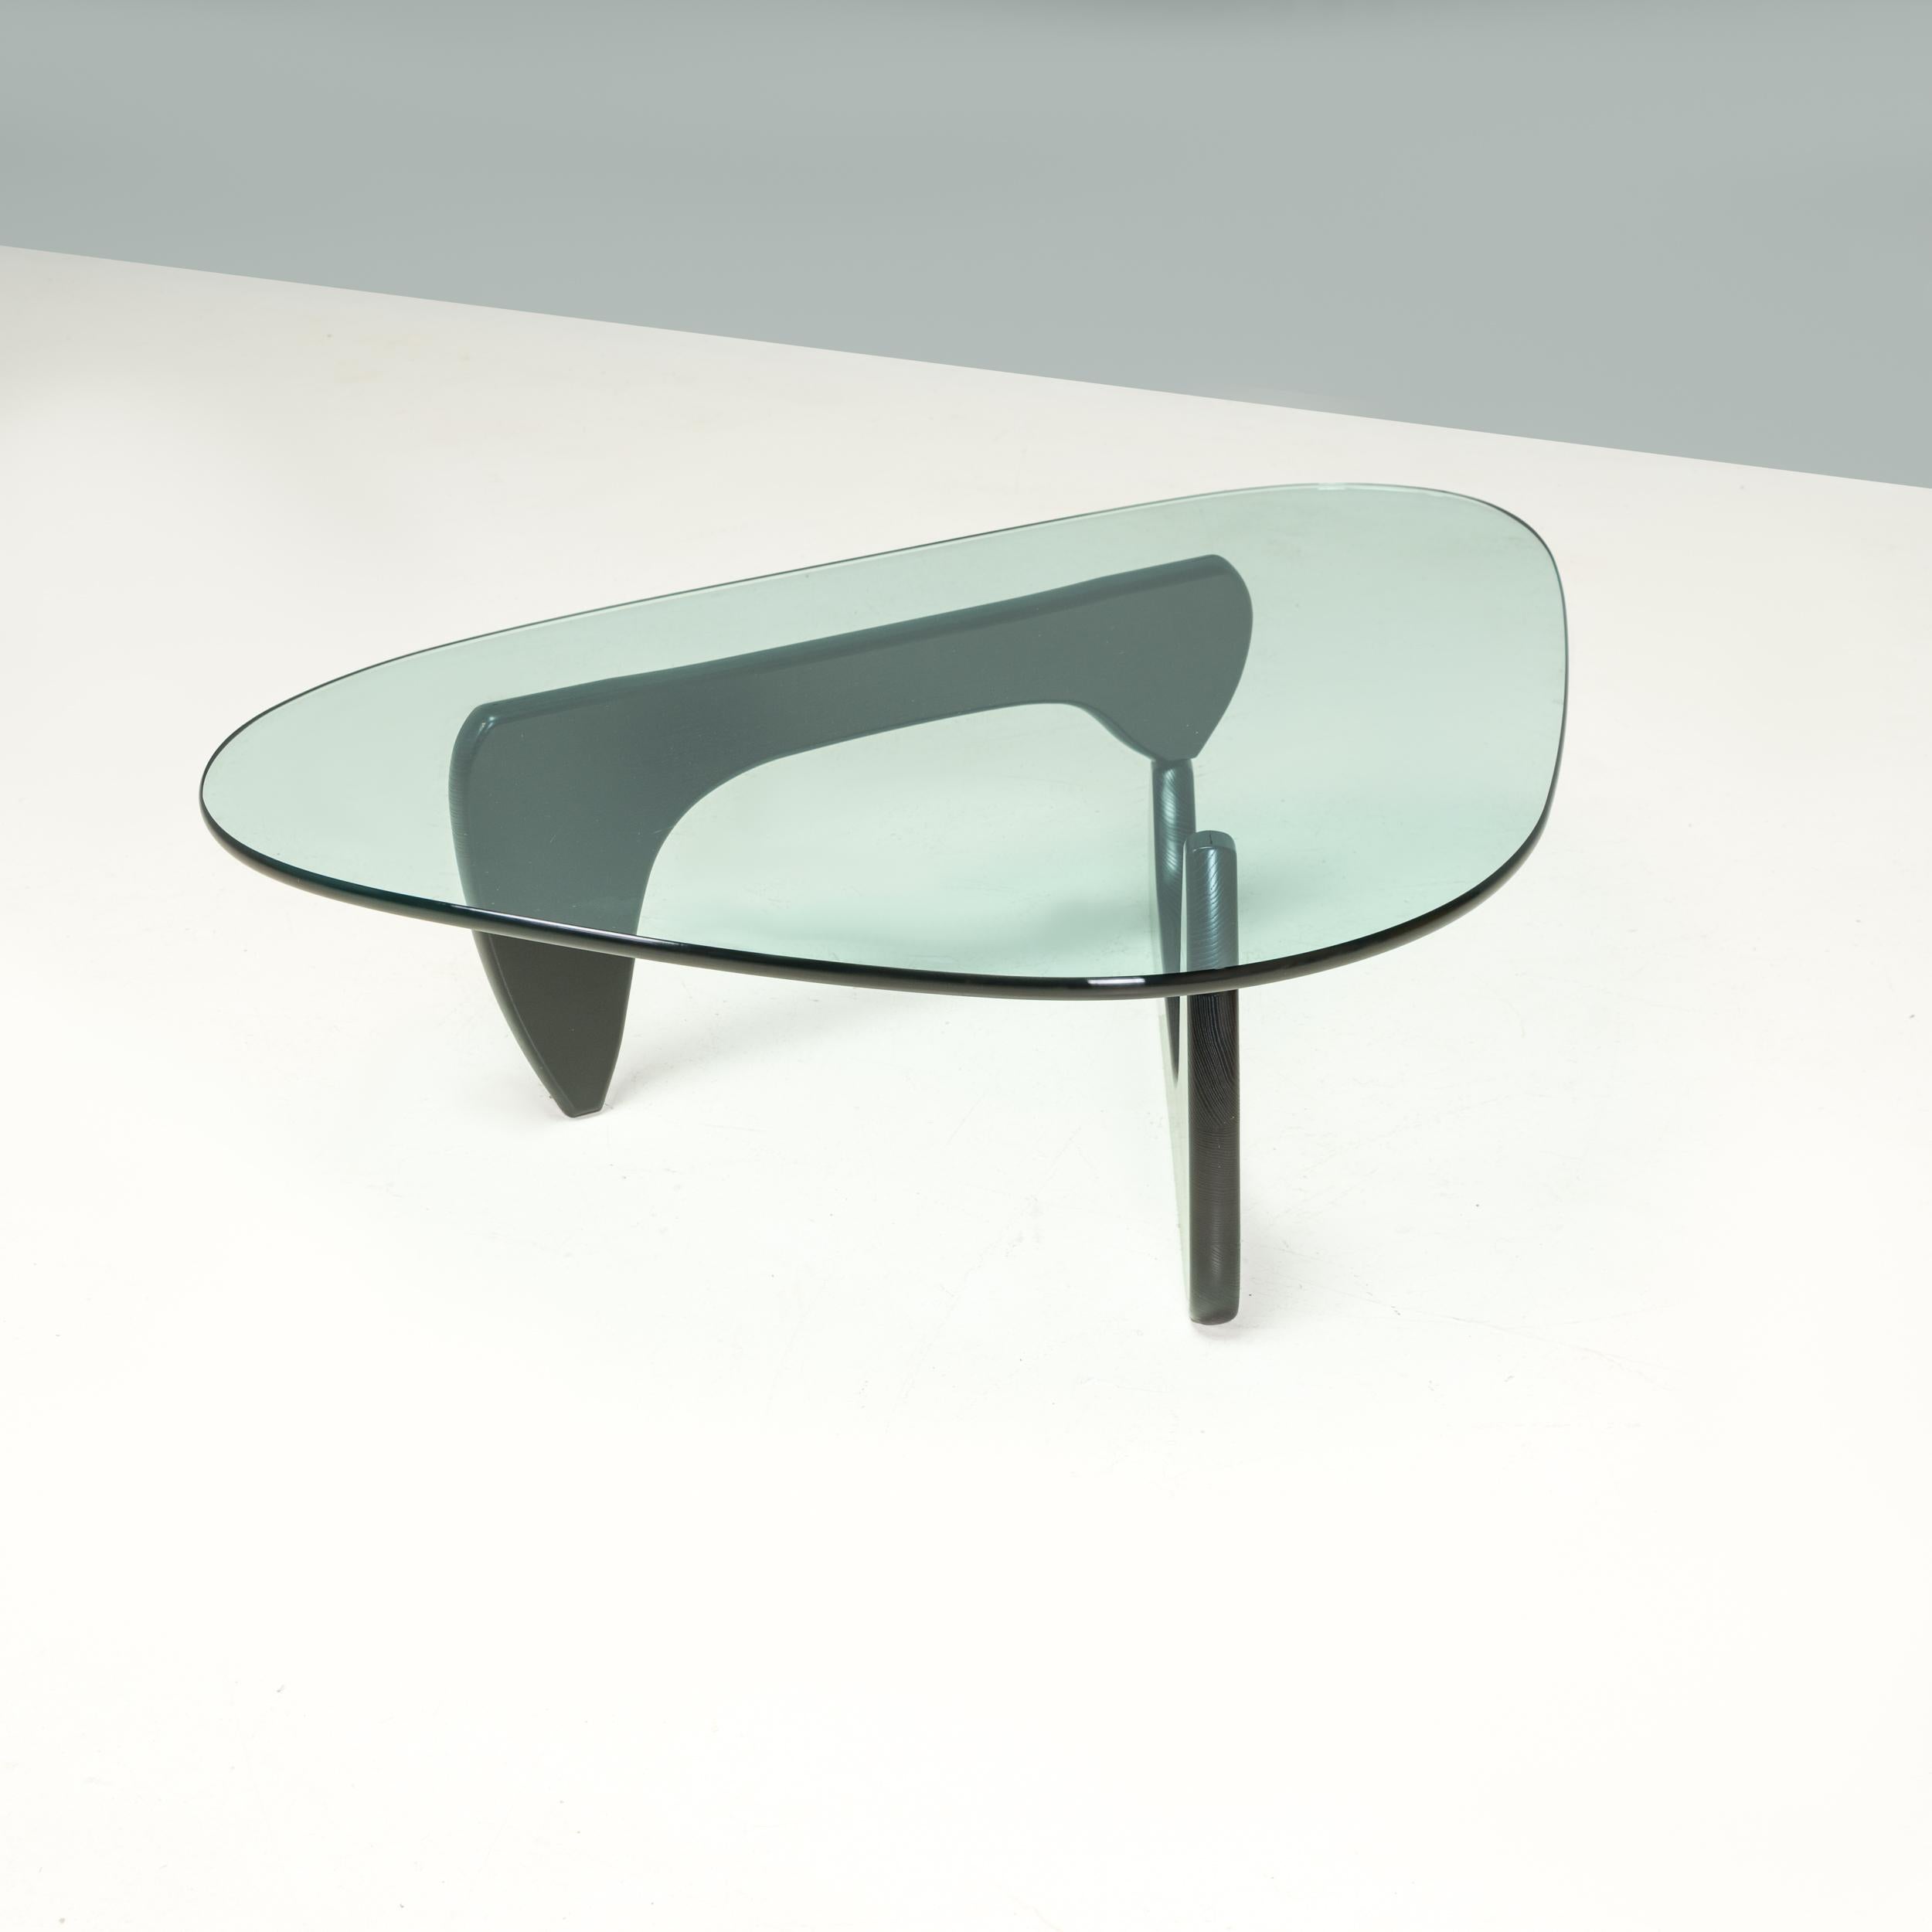 Originally designed in 1944 and regarded by Isamu Noguchi as his best furniture design, the Noguchi coffee table has become a true mid century icon.

This model of the coffee table was manufactured by Vitra in 2008 and features the recognisable